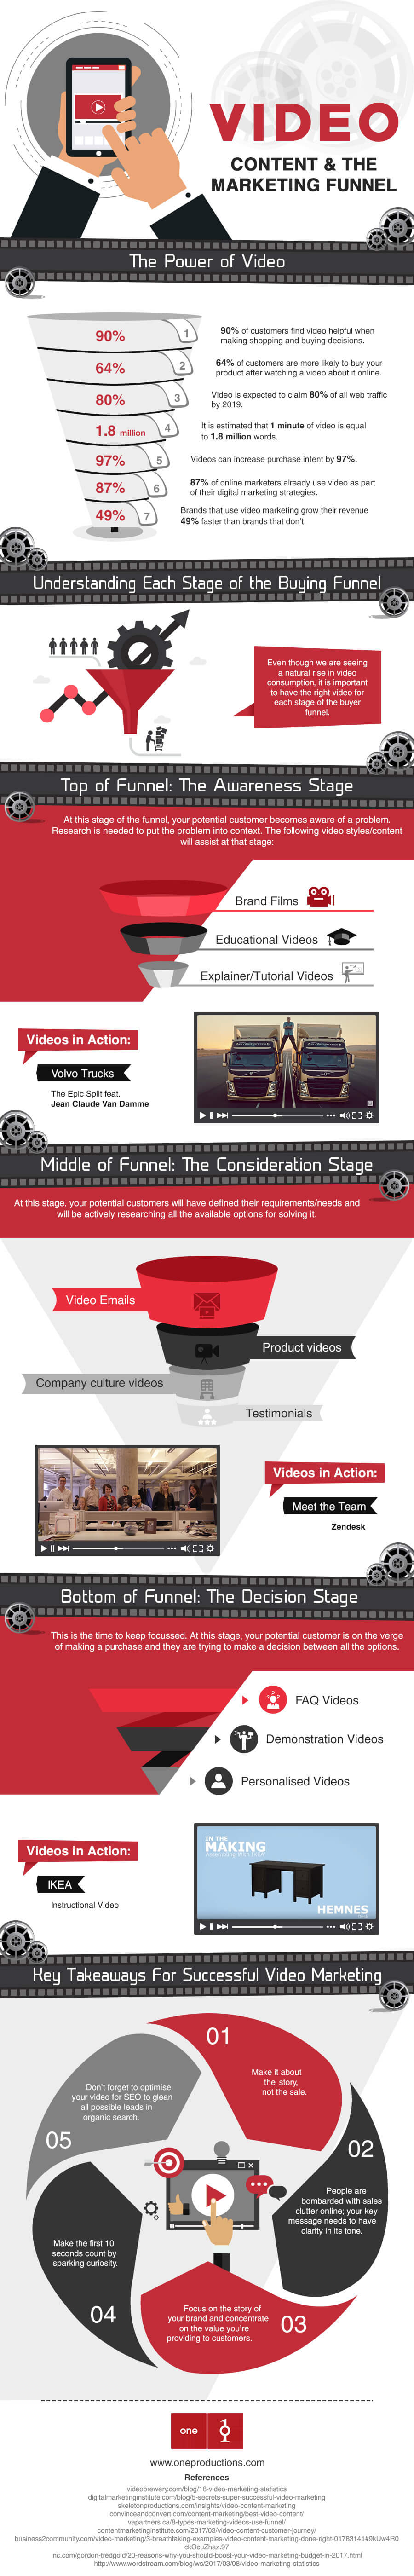 Video content and the marketing funnel